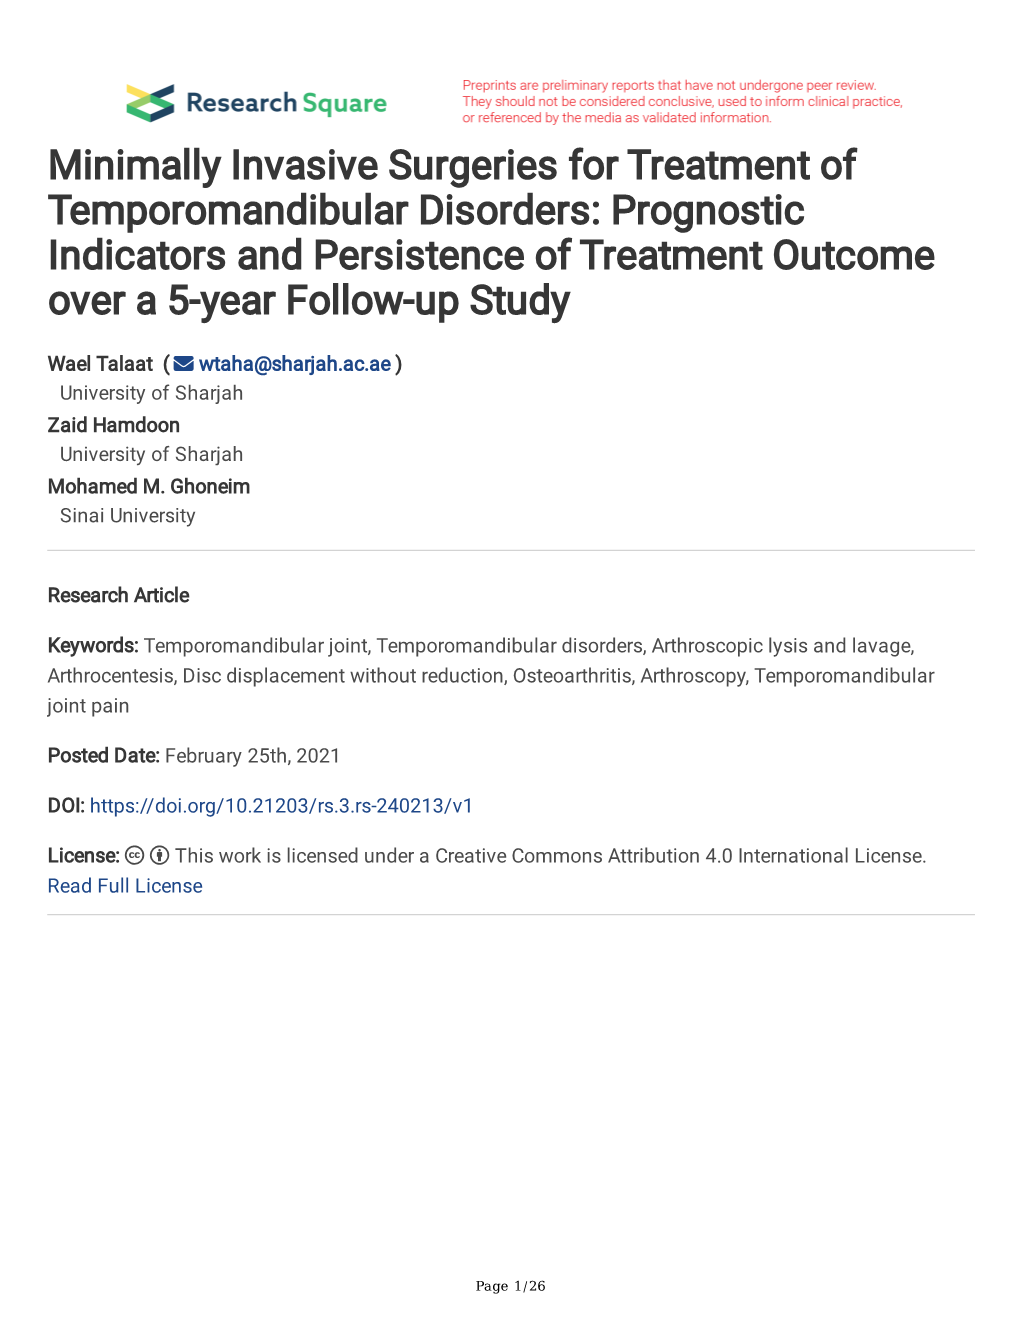 Minimally Invasive Surgeries for Treatment of Temporomandibular Disorders: Prognostic Indicators and Persistence of Treatment Outcome Over a 5-Year Follow-Up Study